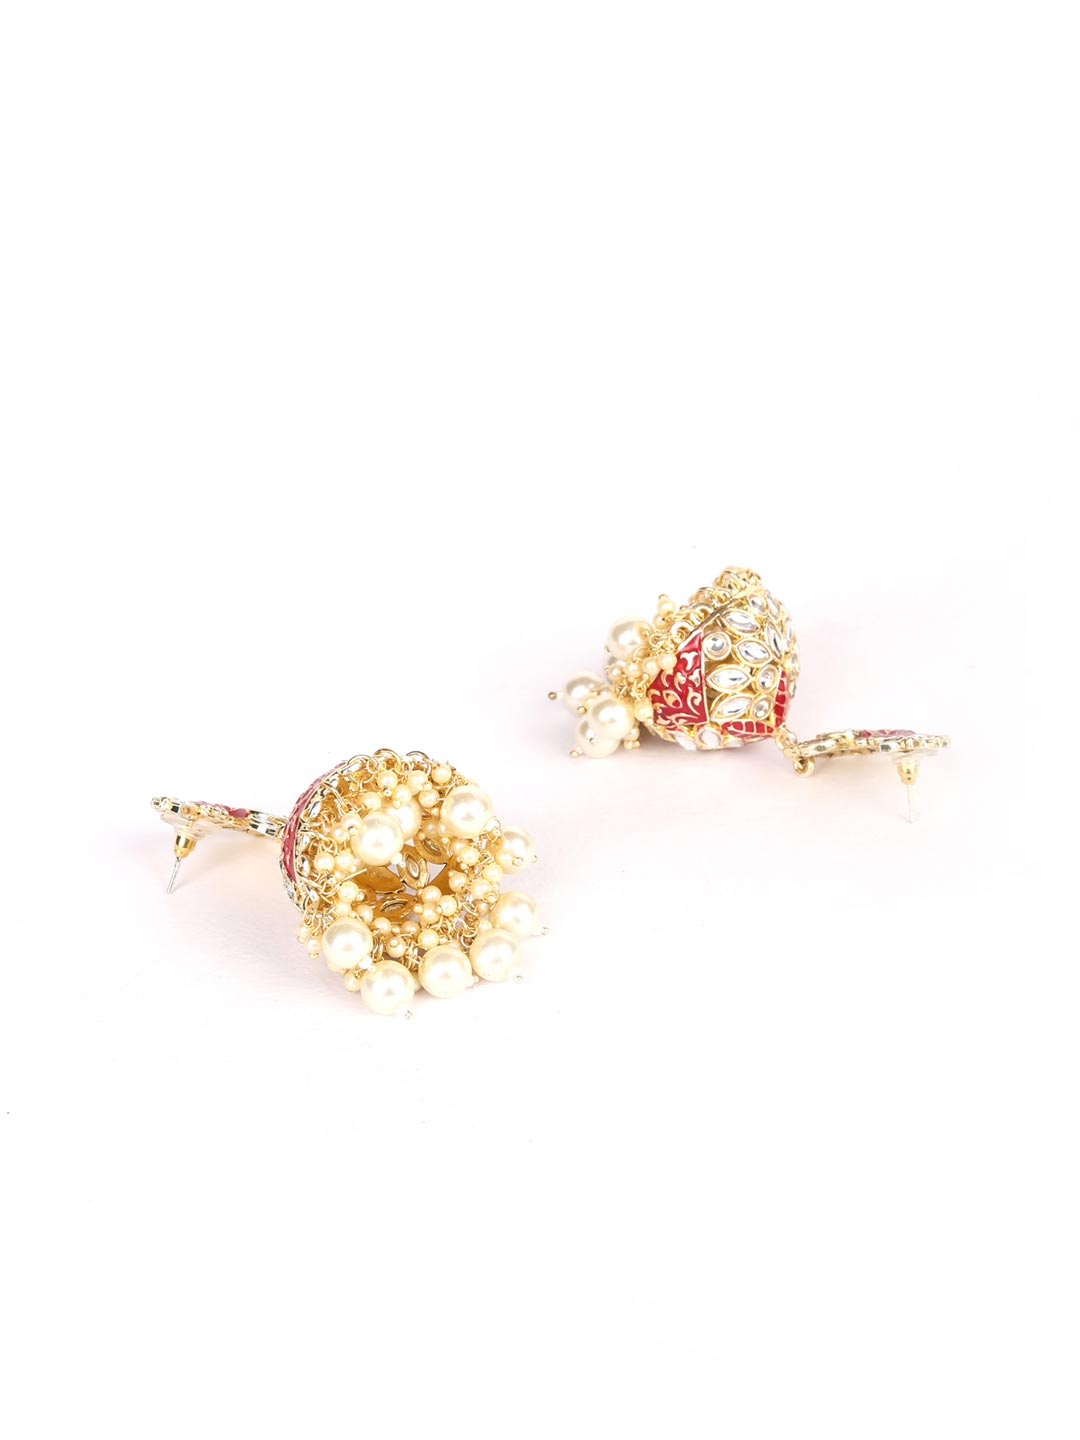 Red Beads Pearls Stones Gold Plated Peacock Jhumka Earring